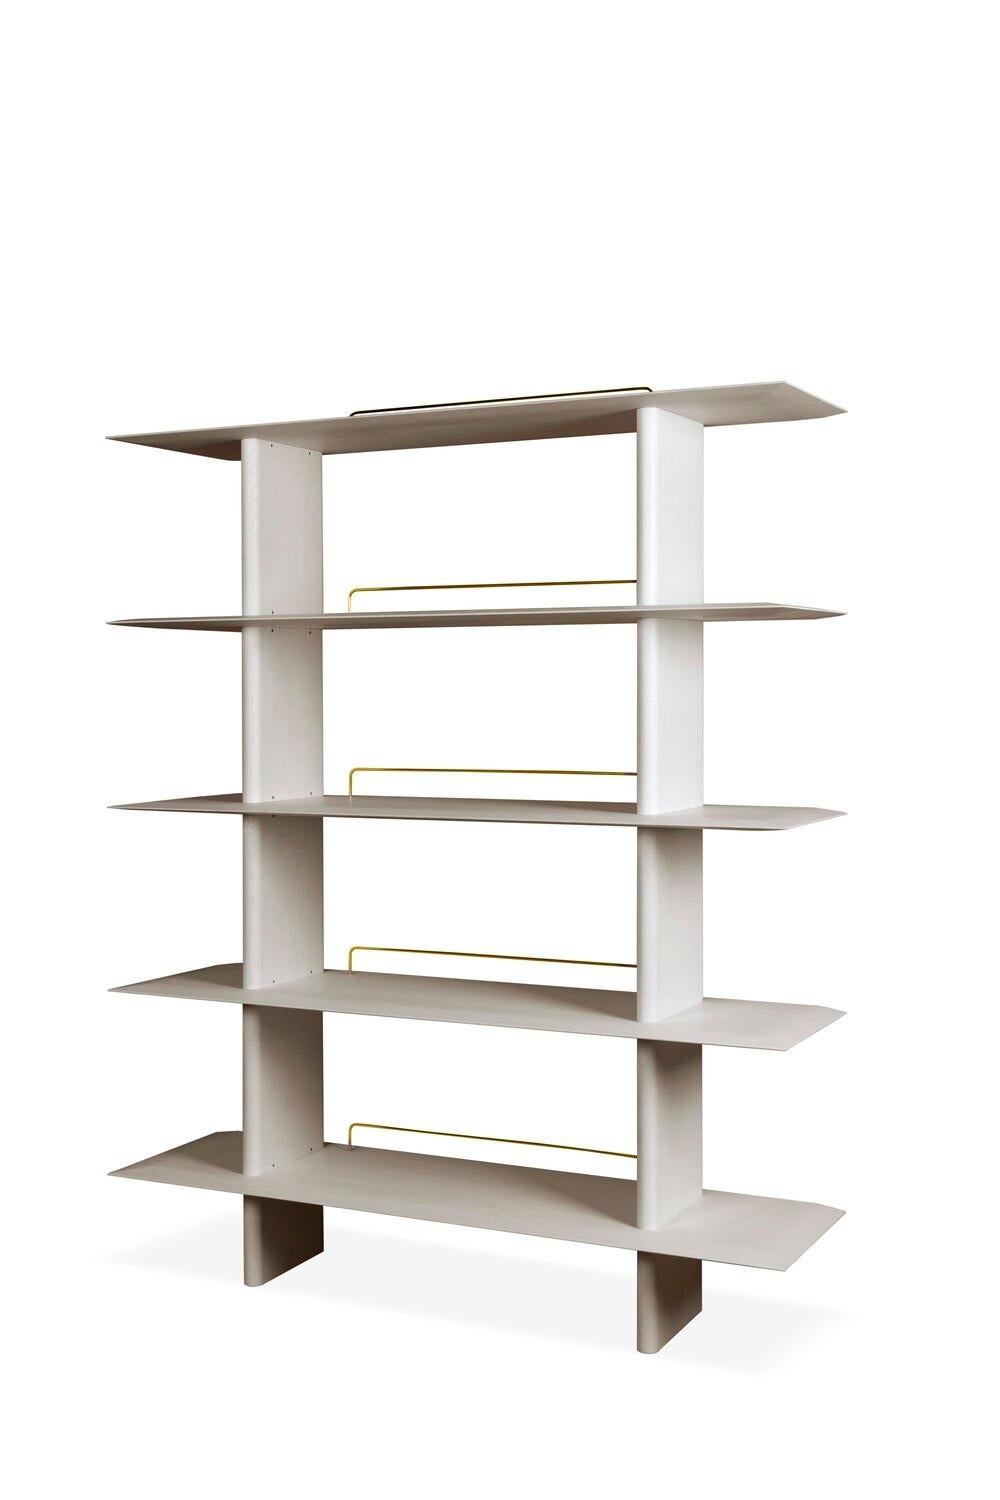 Embodying the spirit of customization, the Grafton bookcase is modular, allowing you to build a piece of furniture unique to your interior. The solid oak shelves have beautifully carved, tapered ‘pillow’ edges, which add a lightness and refinement